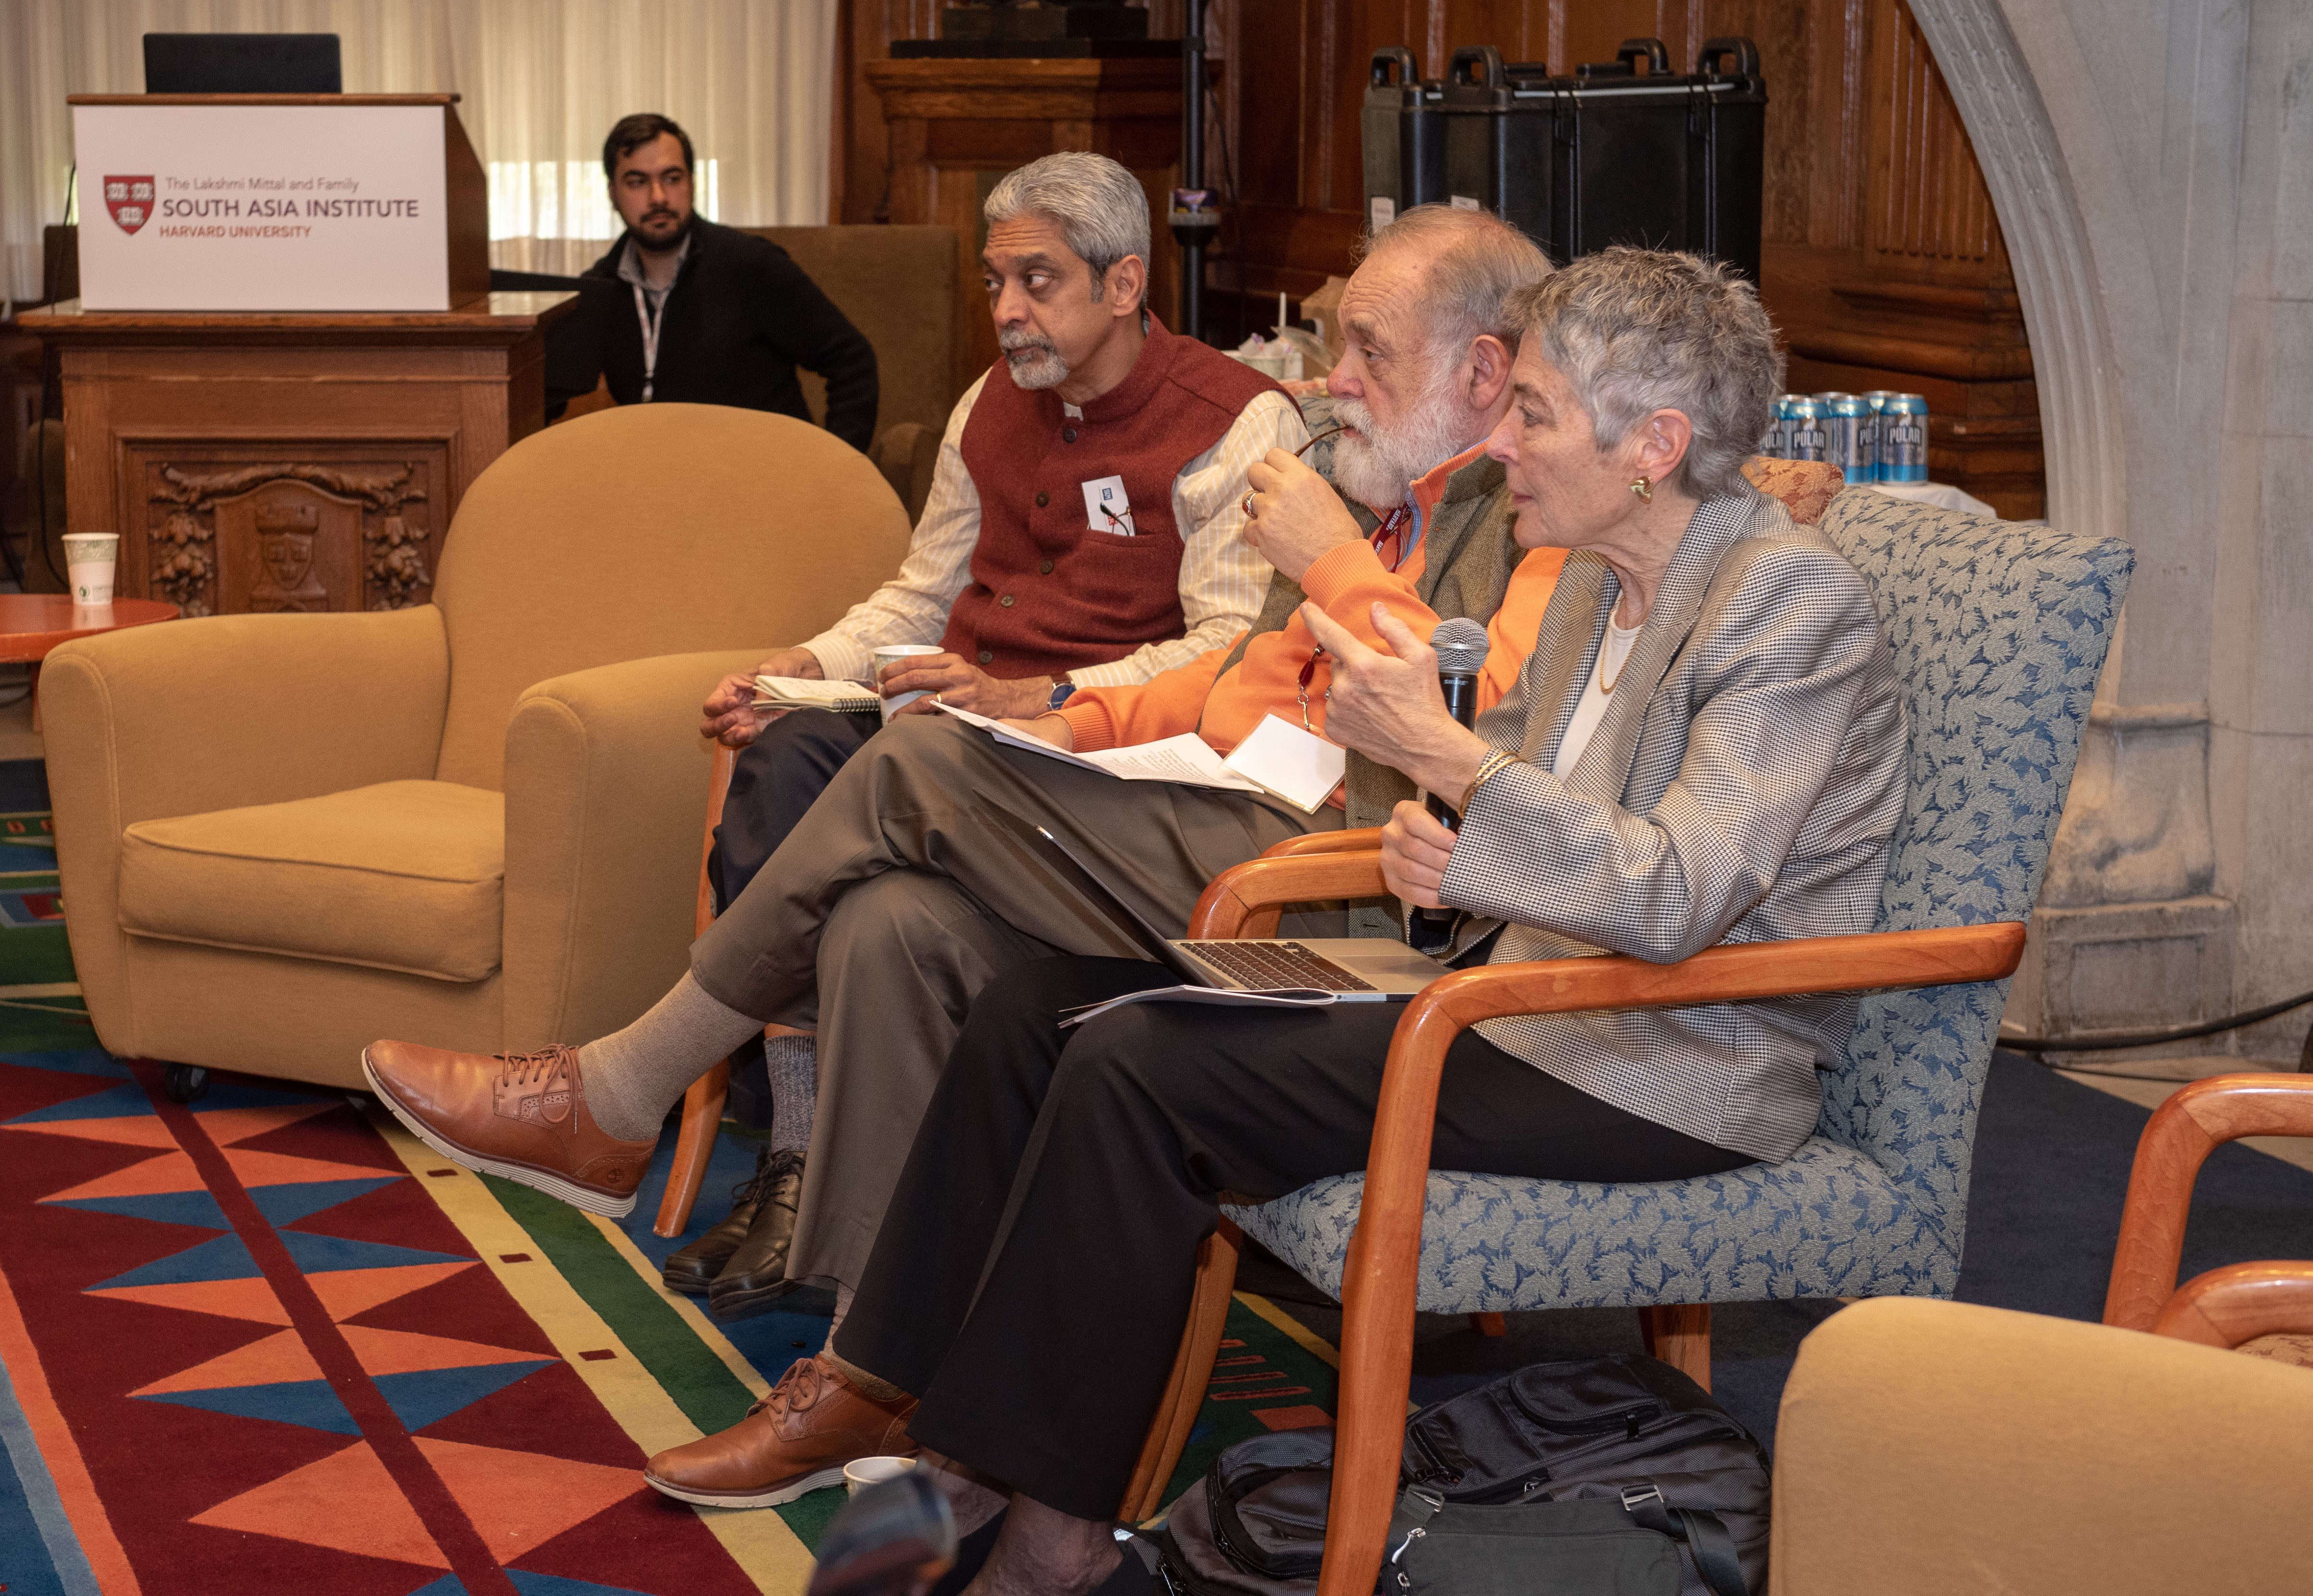 Vikram Patel, Richard Cash, and Jennifer Leaning speak during the Health in South Asia session.